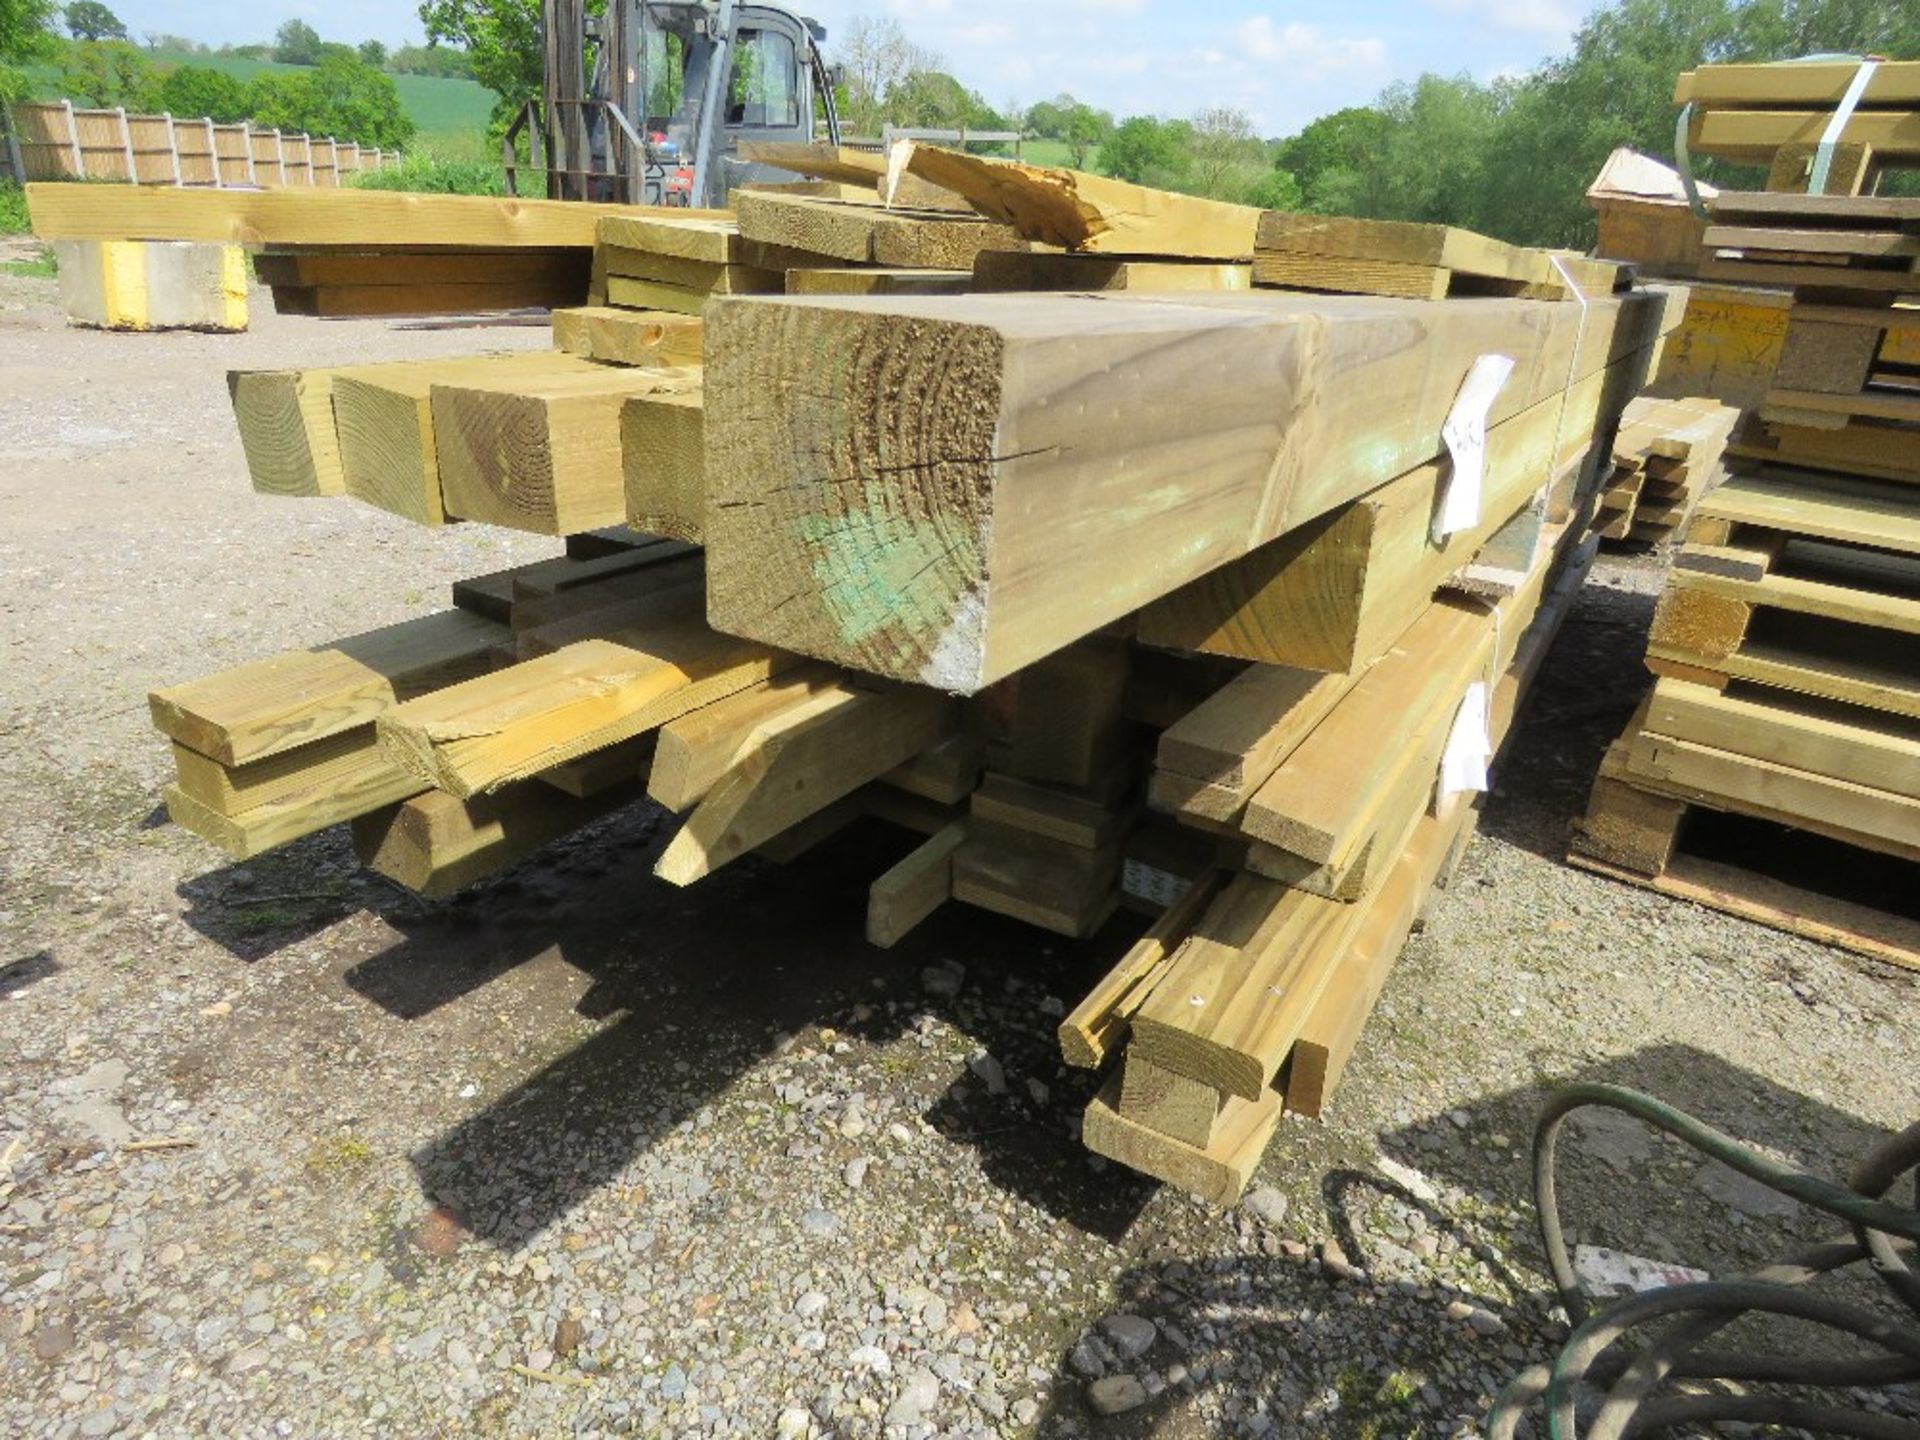 2 X BUNDLES OF TREATED FENCING TIMBERS, POSTS AND BOARDS AS SHOWN, 7-10FT LENGTH APPROX. - Image 3 of 5